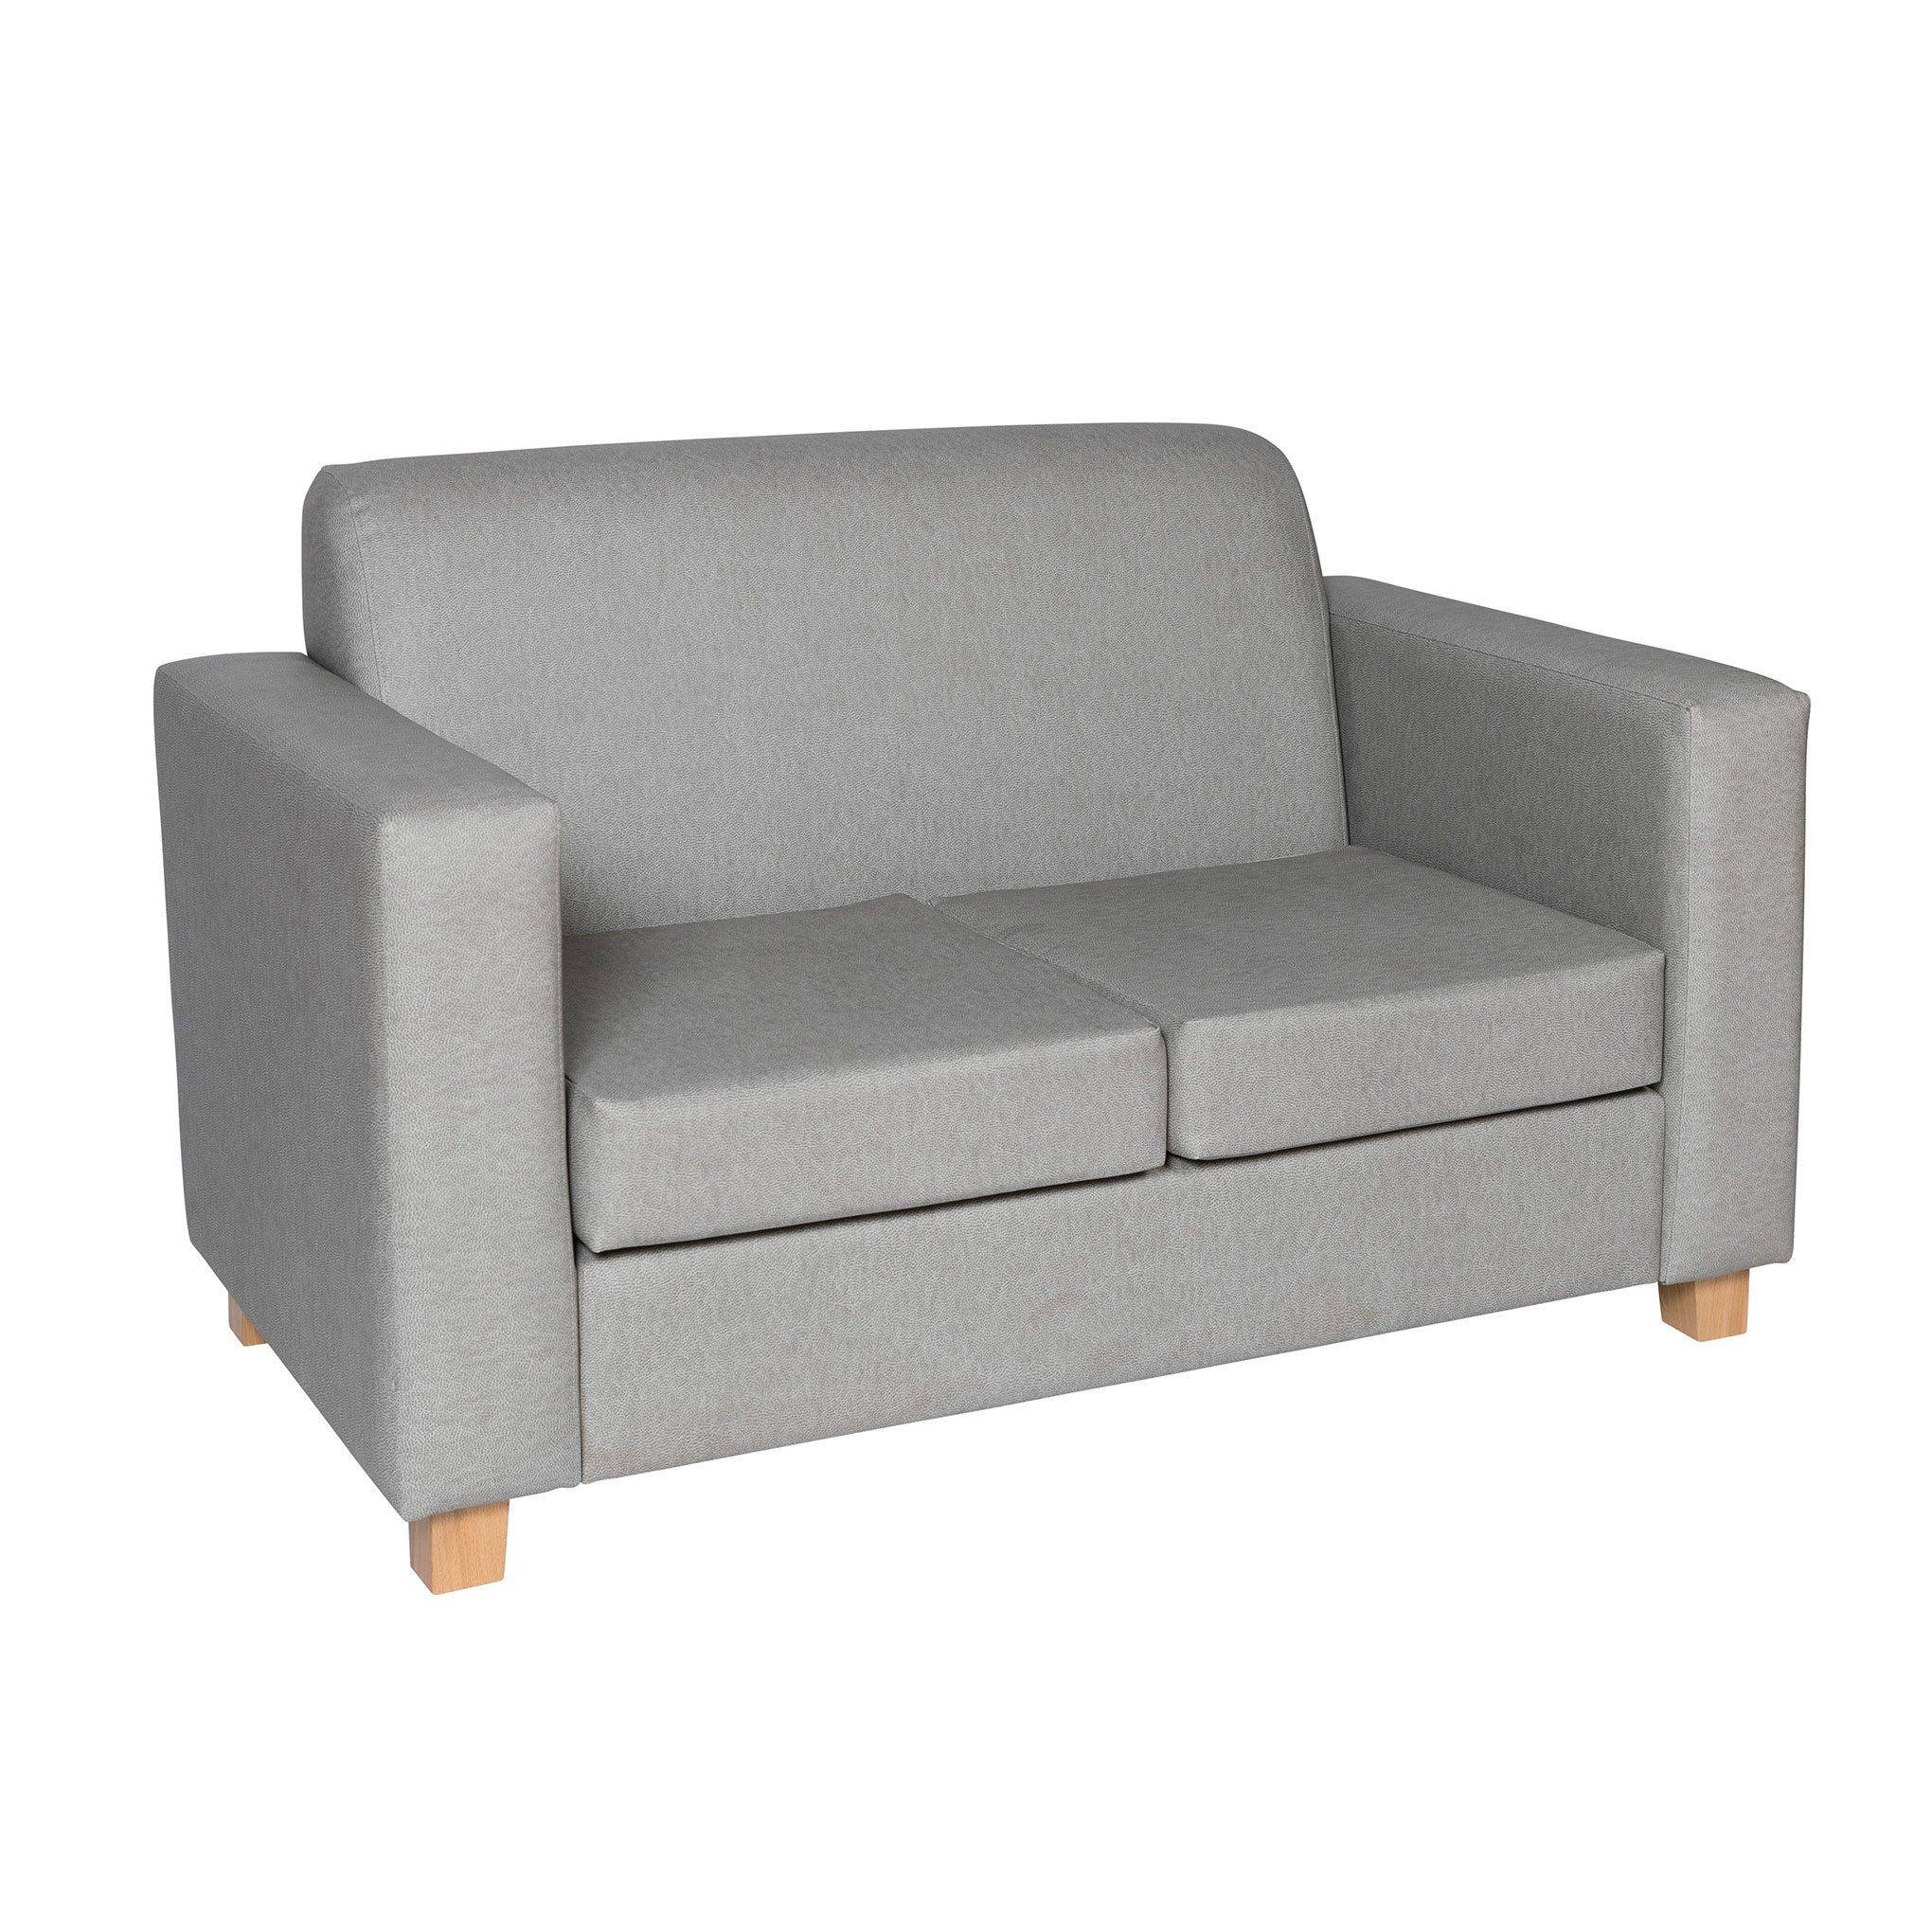 Arden 2 Seater with Standard Arm